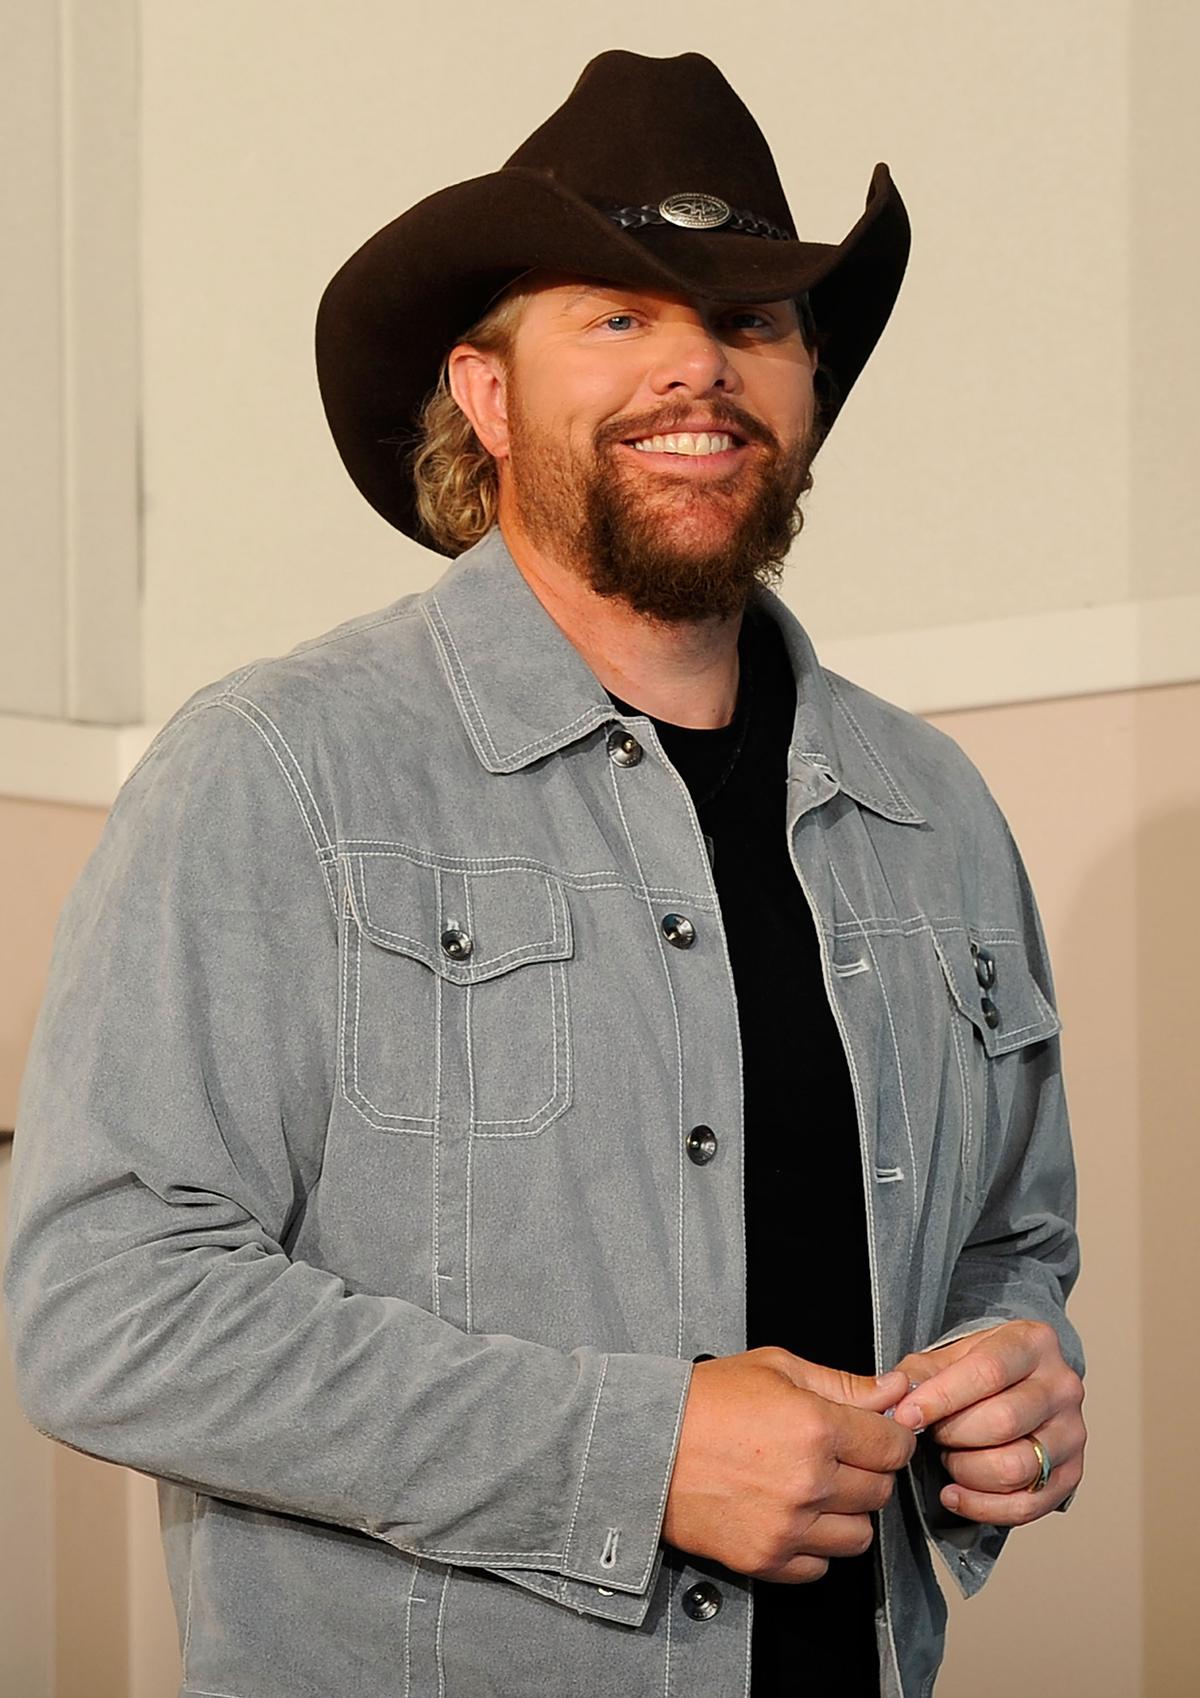 Toby Keith at the 45th Annual Academy of Country Music Awards on April 18, 2010. (Kevork Djansezian/Getty Images)